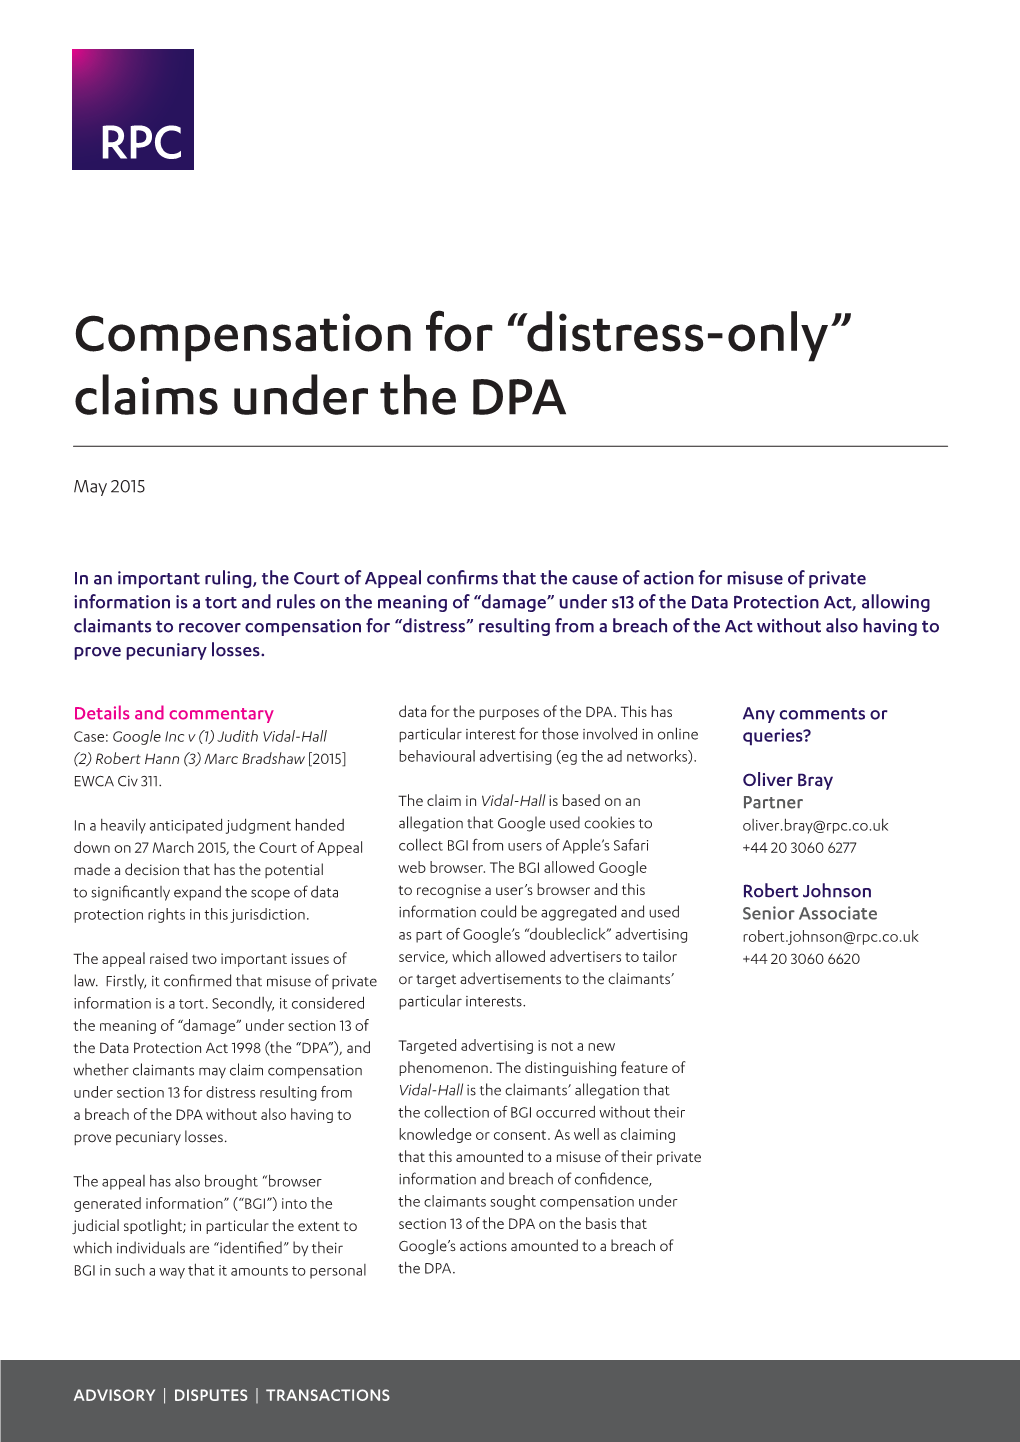 Compensation for “Distress-Only” Claims Under the DPA